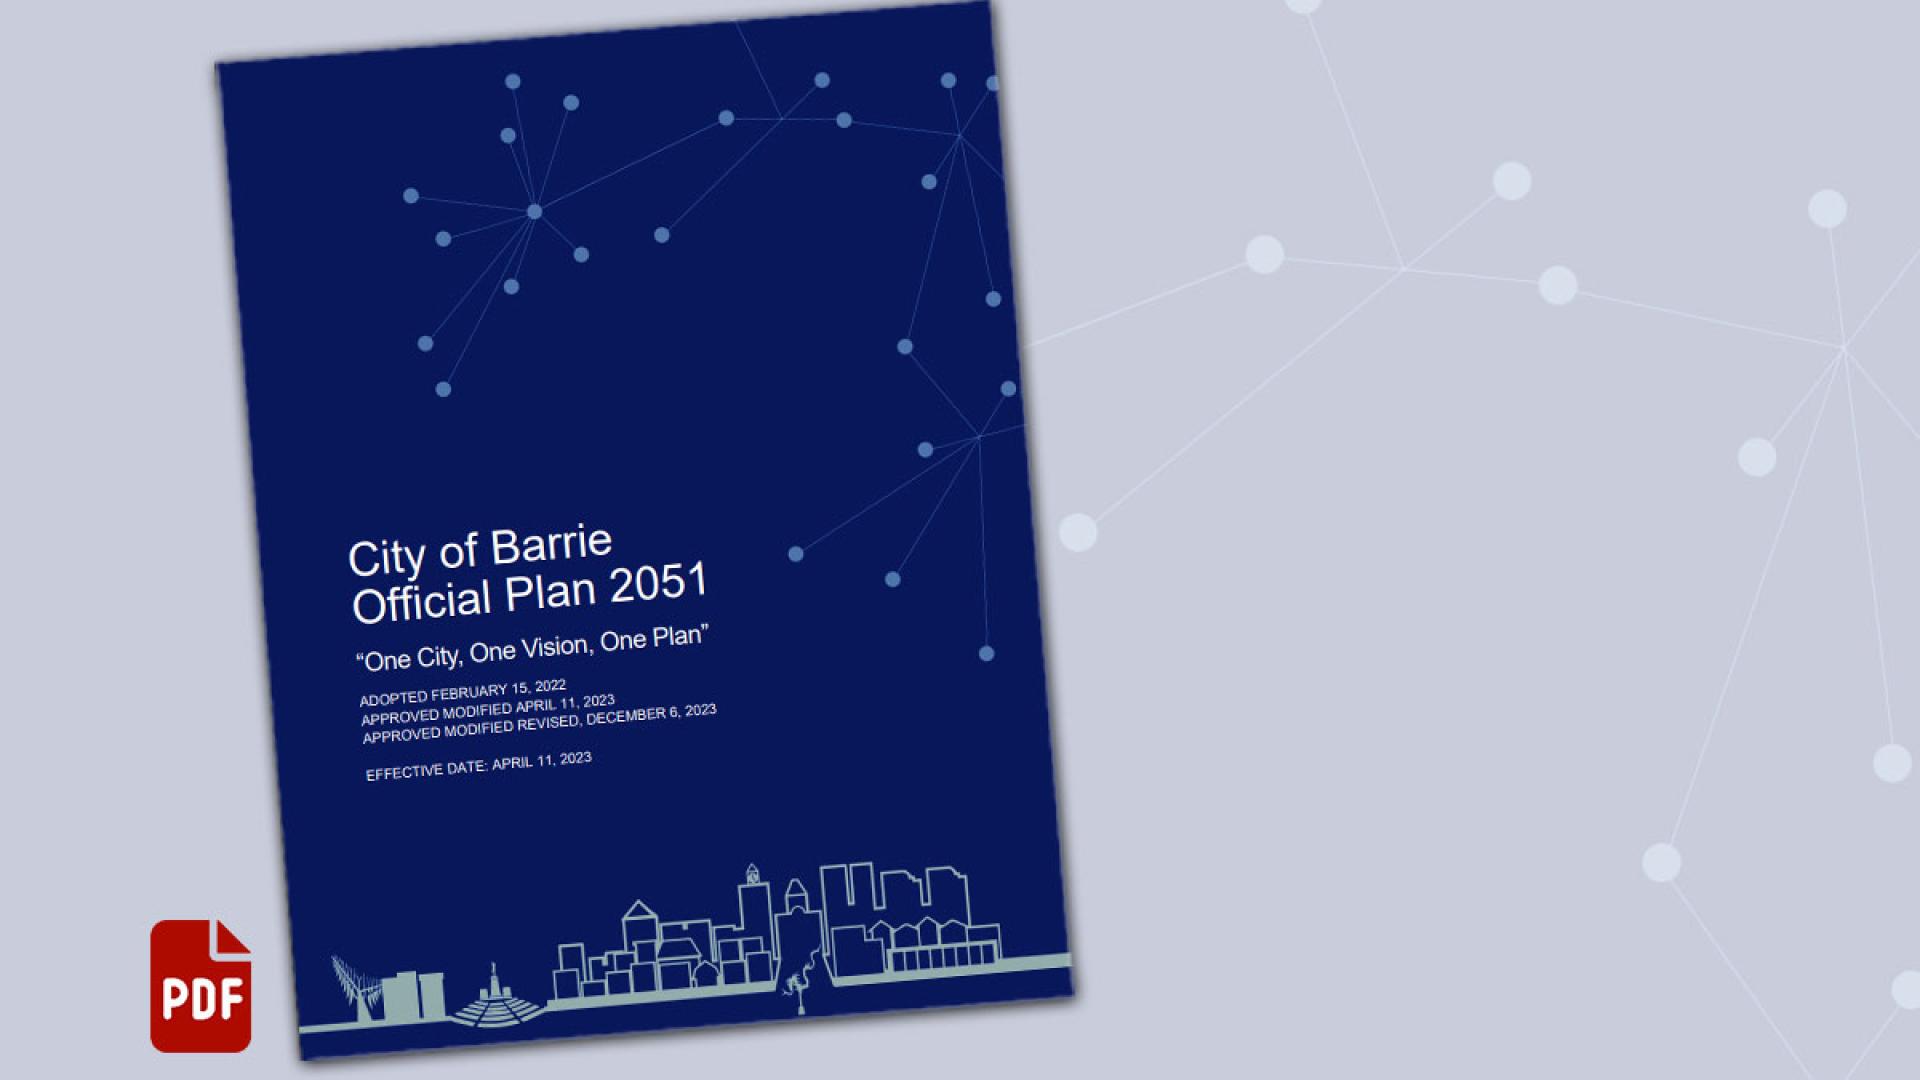 Cover page of the City of Barrie's Official Plan with a PDF icon